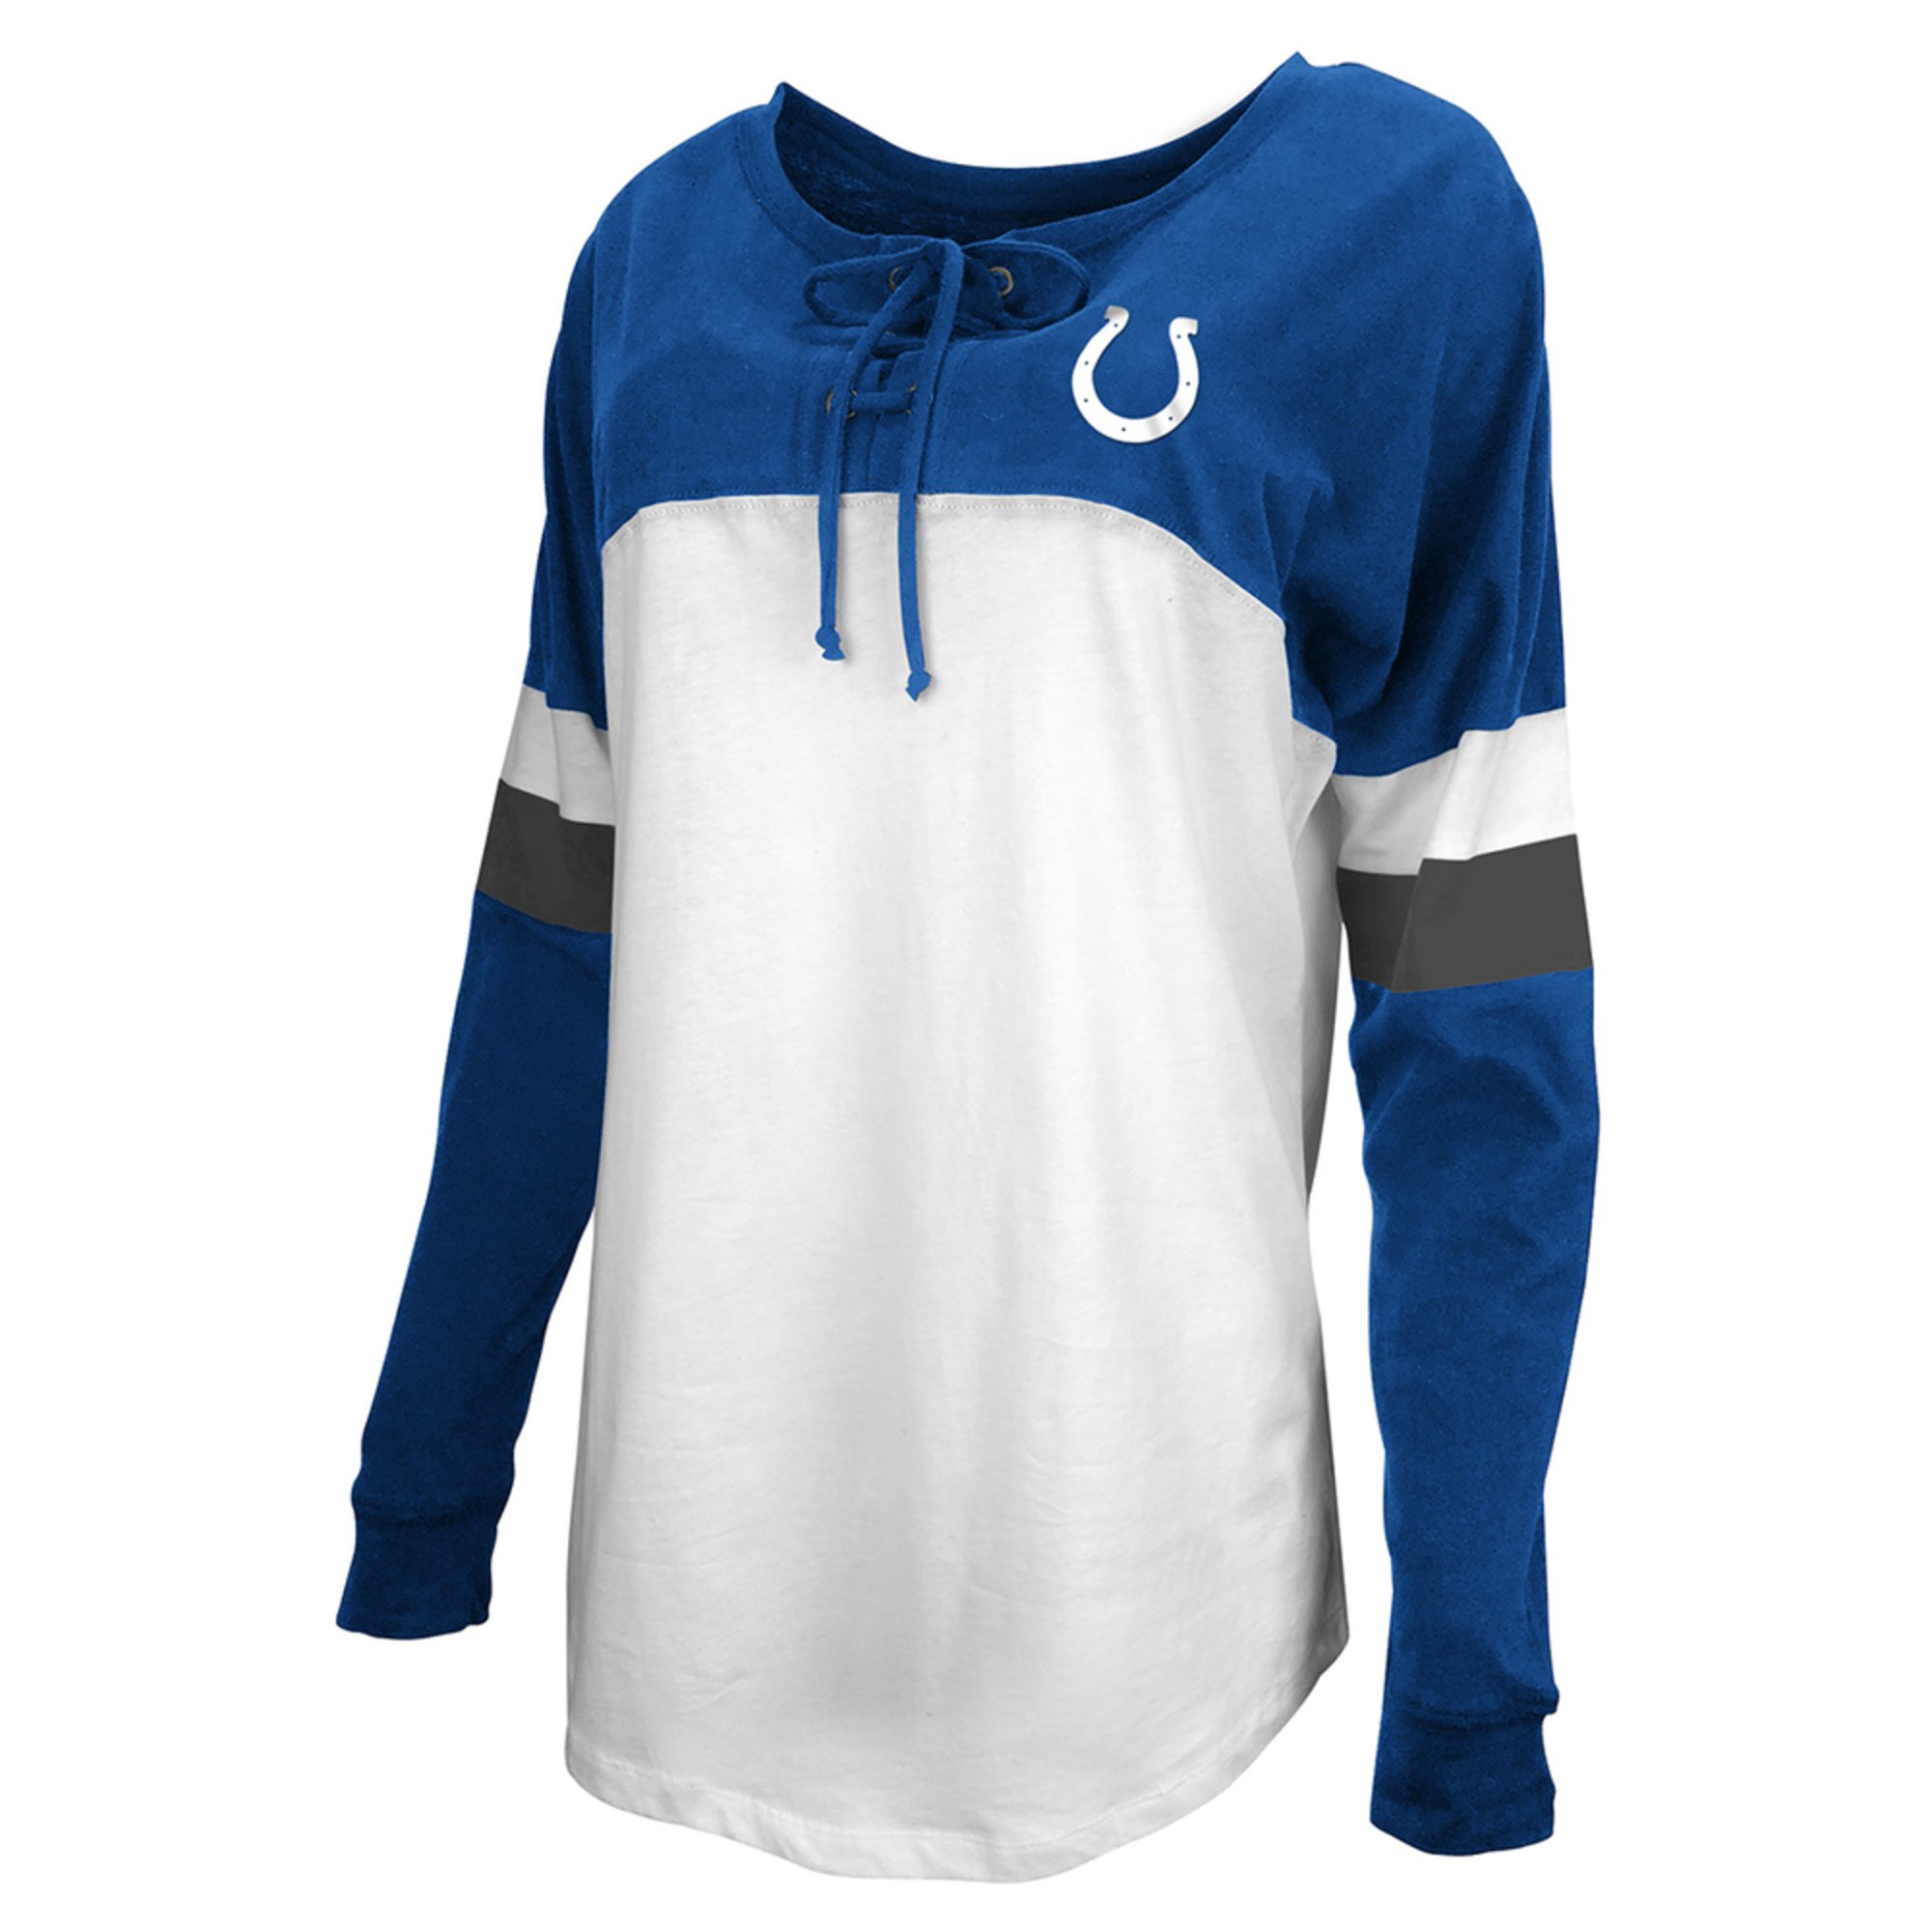 womens colts jersey